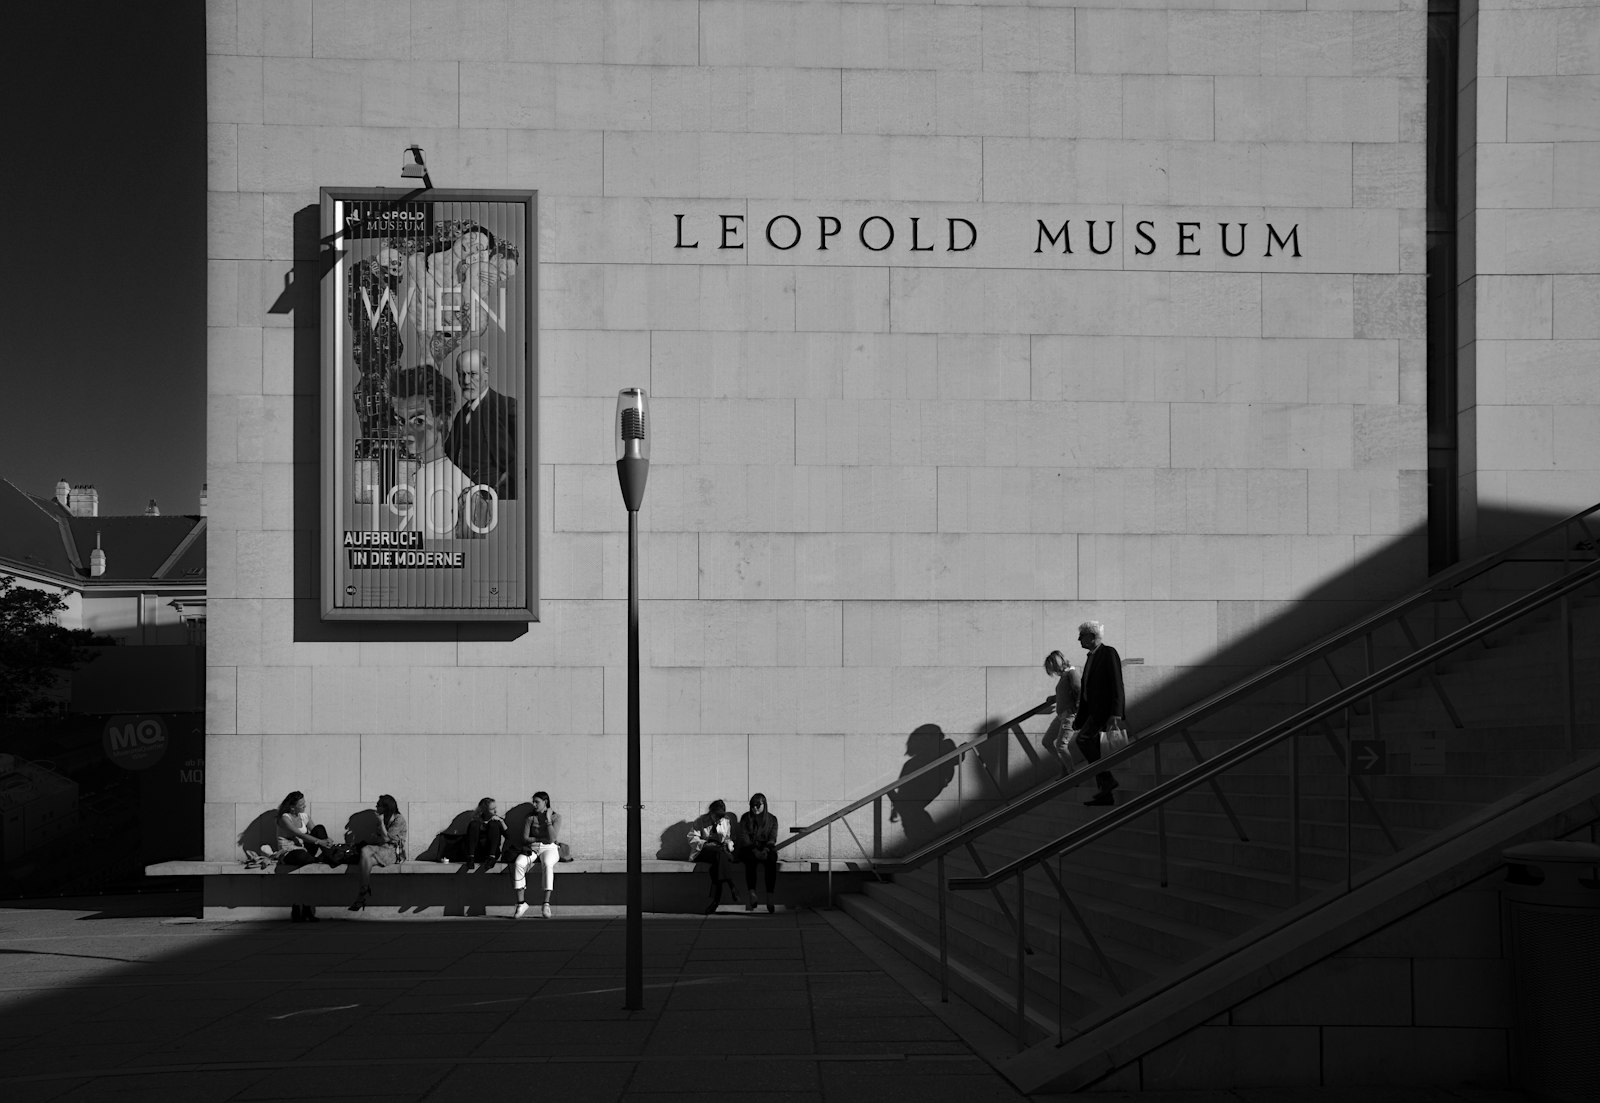 Sony a6000 + Sony E PZ 18-105mm F4 G OSS sample photo. Leopold museum building photography